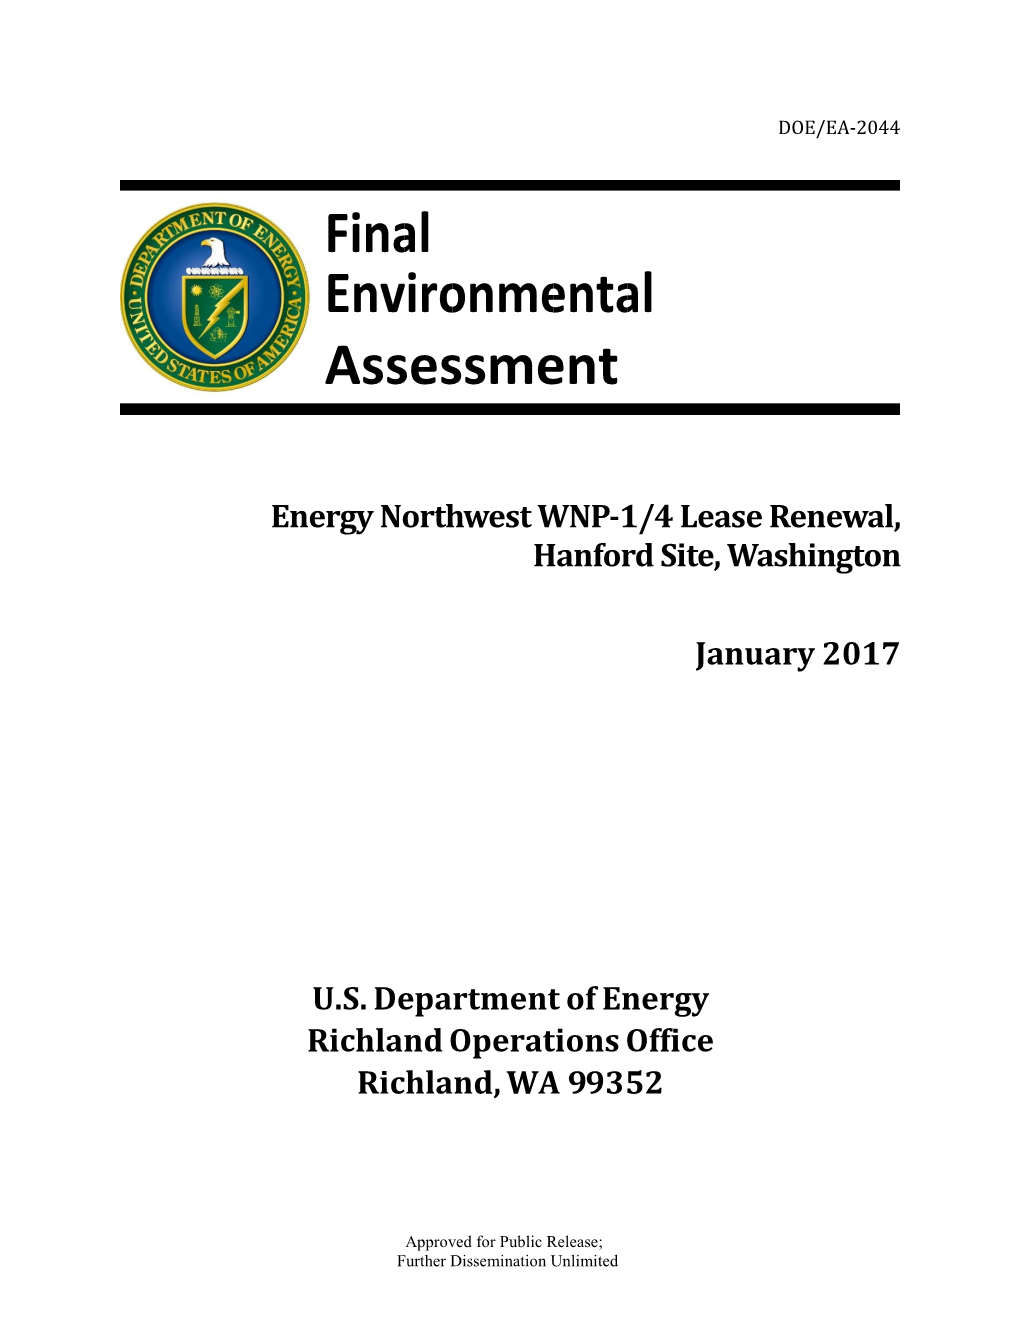 Final Environmental Assessment for the Energy Northwest WNP-1/4 Lease Renewal January 2017 I